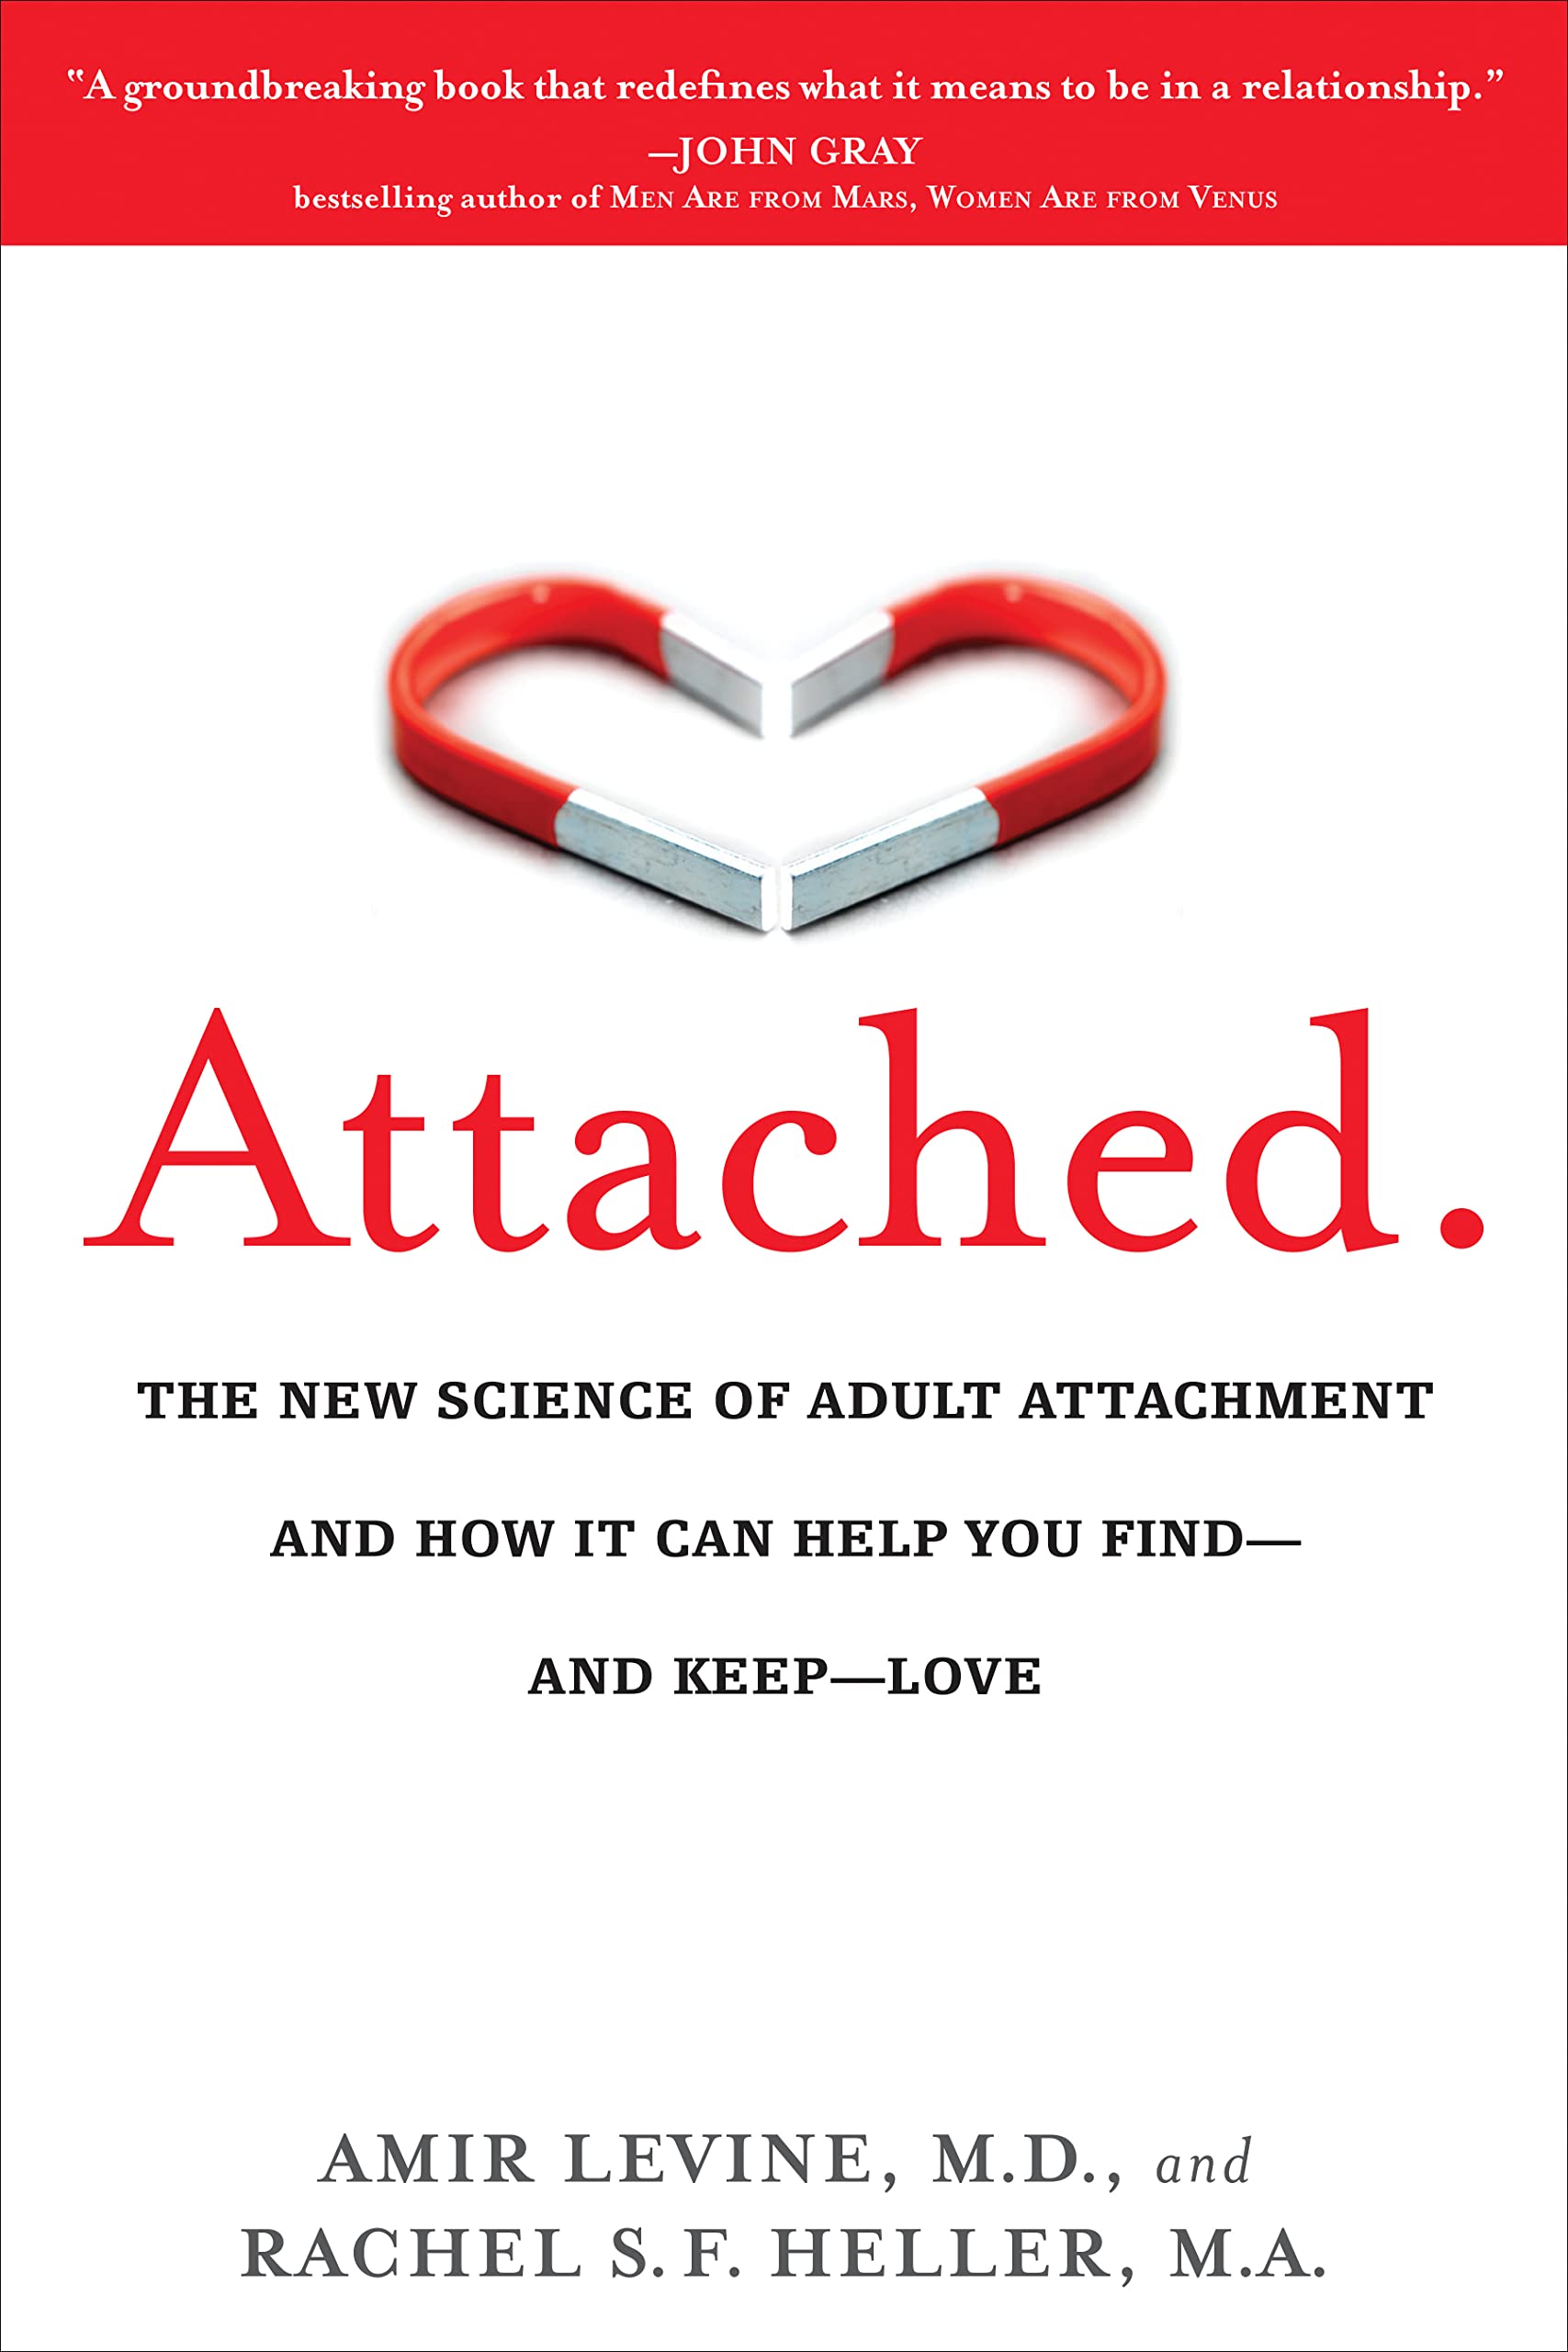 Attached audiobook: The New Science of Adult Attachment and How It Can Help You Find and Keep Love